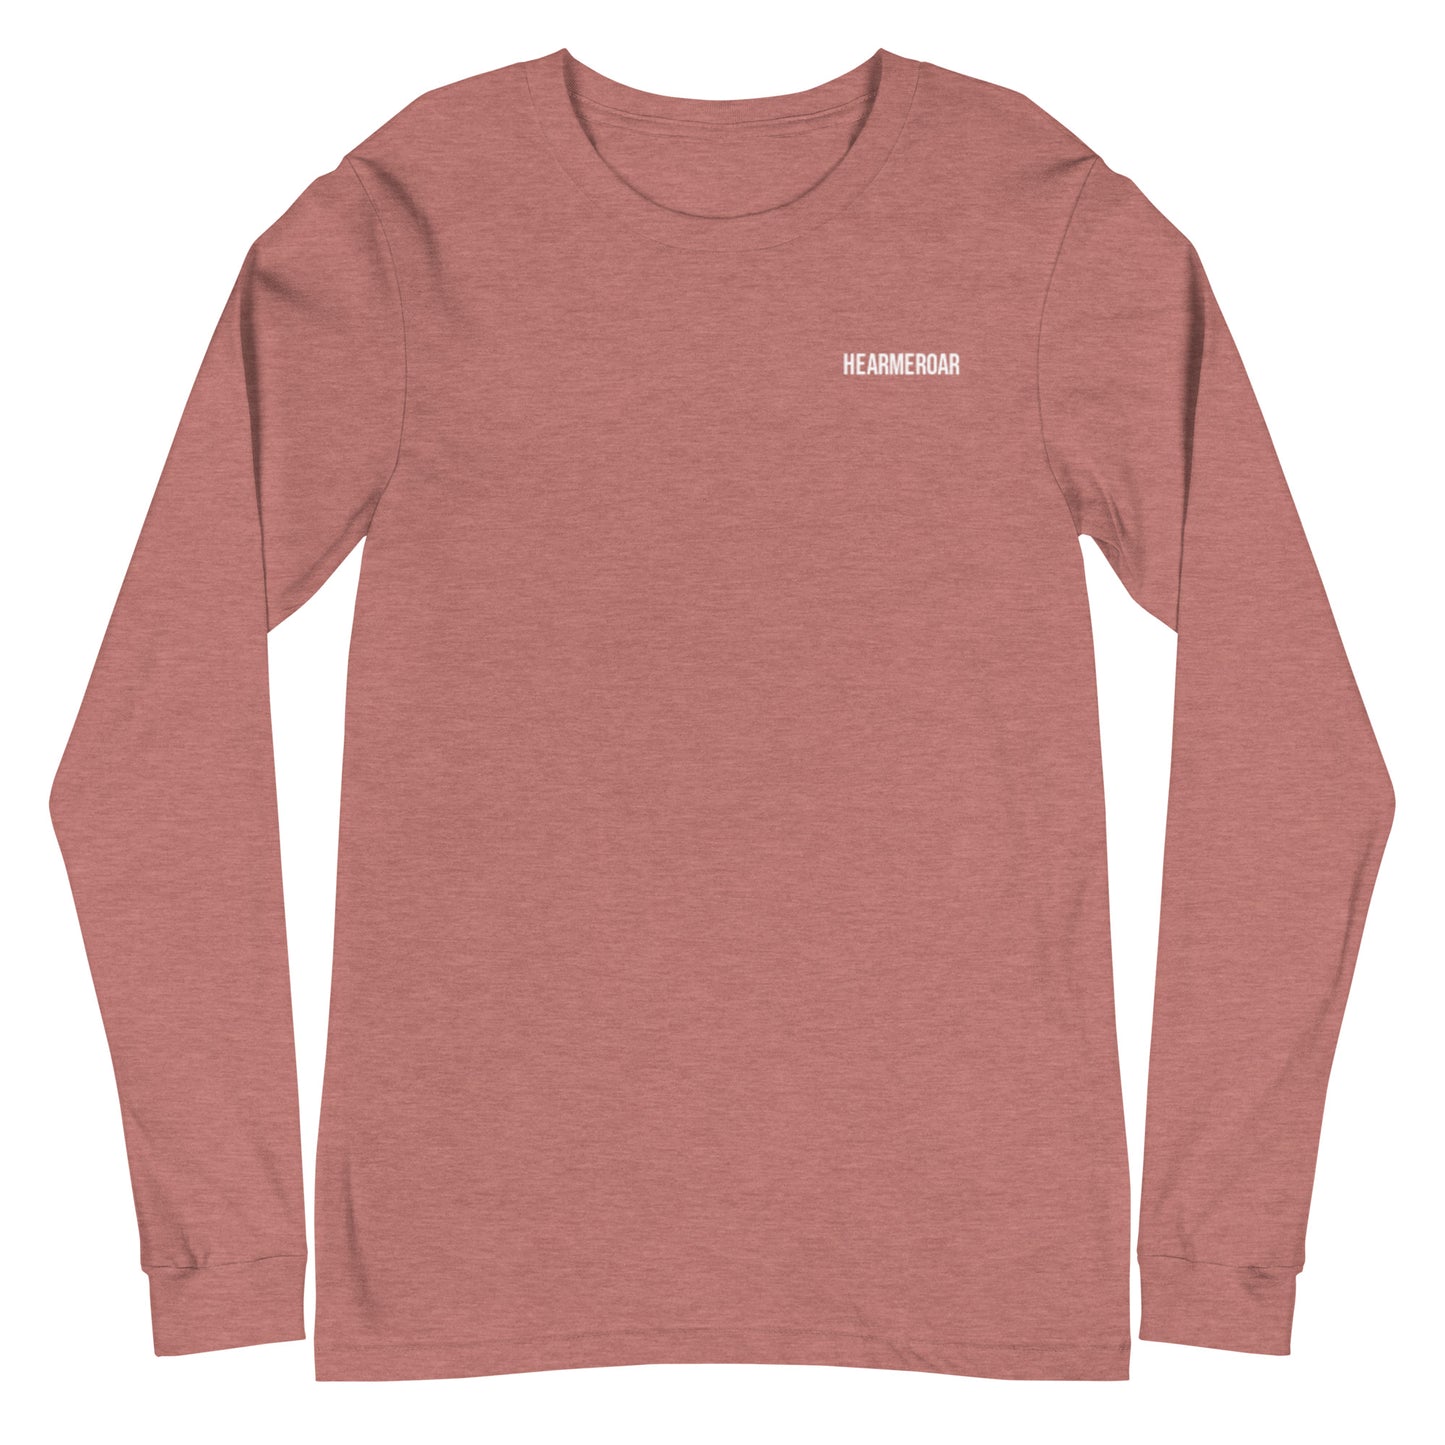 Successful Product Of A Single Mother Unisex Long Sleeve Shirt